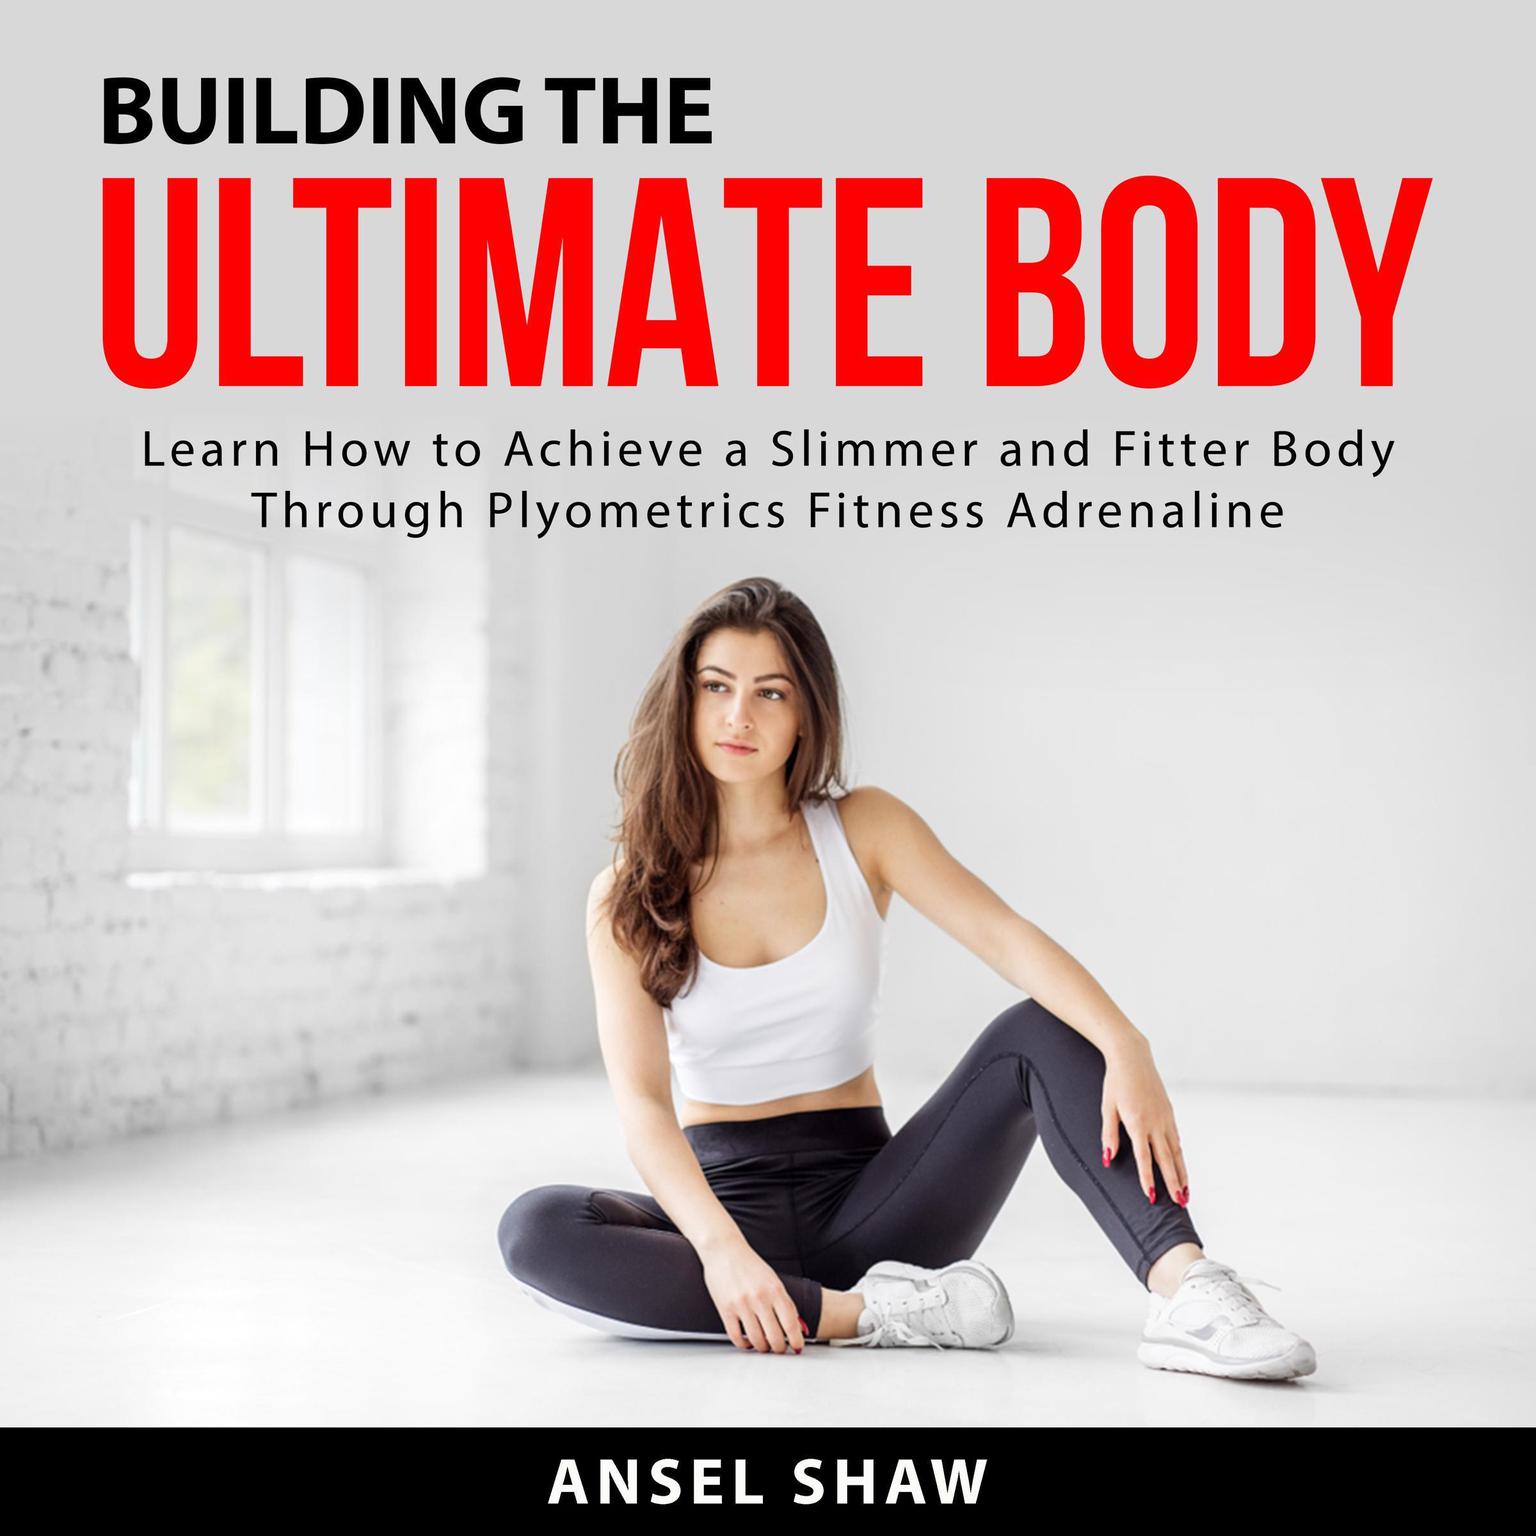 Building the Ultimate Body: Learn How to Achieve a Slimmer and Fitter Body Through Plyometrics Fitness Adrenaline Audiobook, by Ansel Shaw